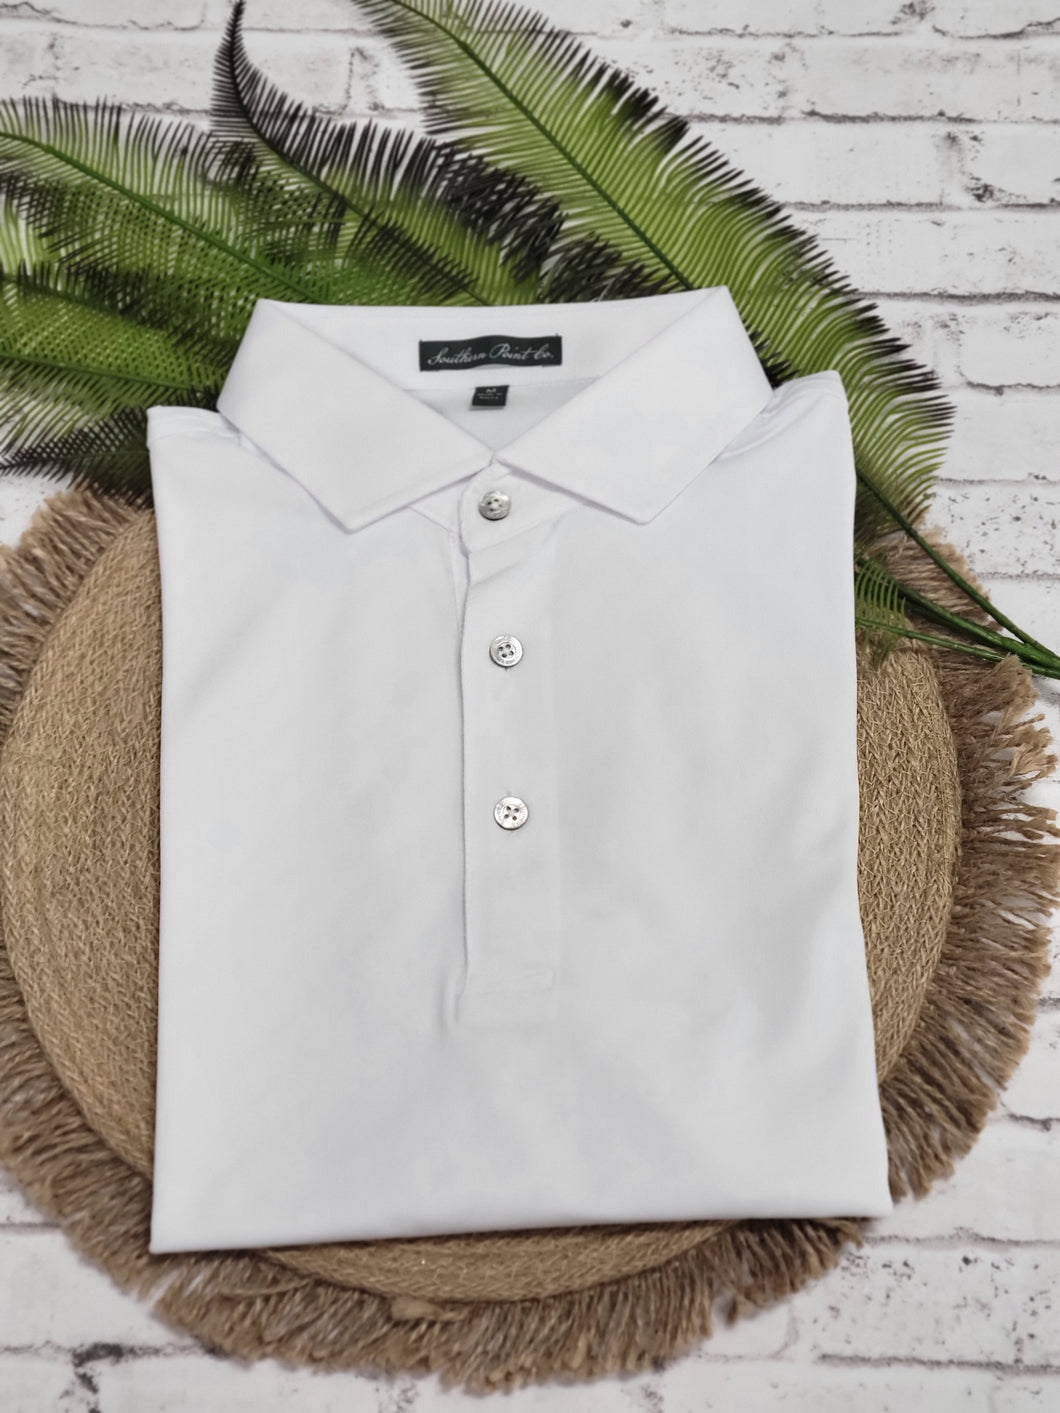 Southern Point White Performance Polo